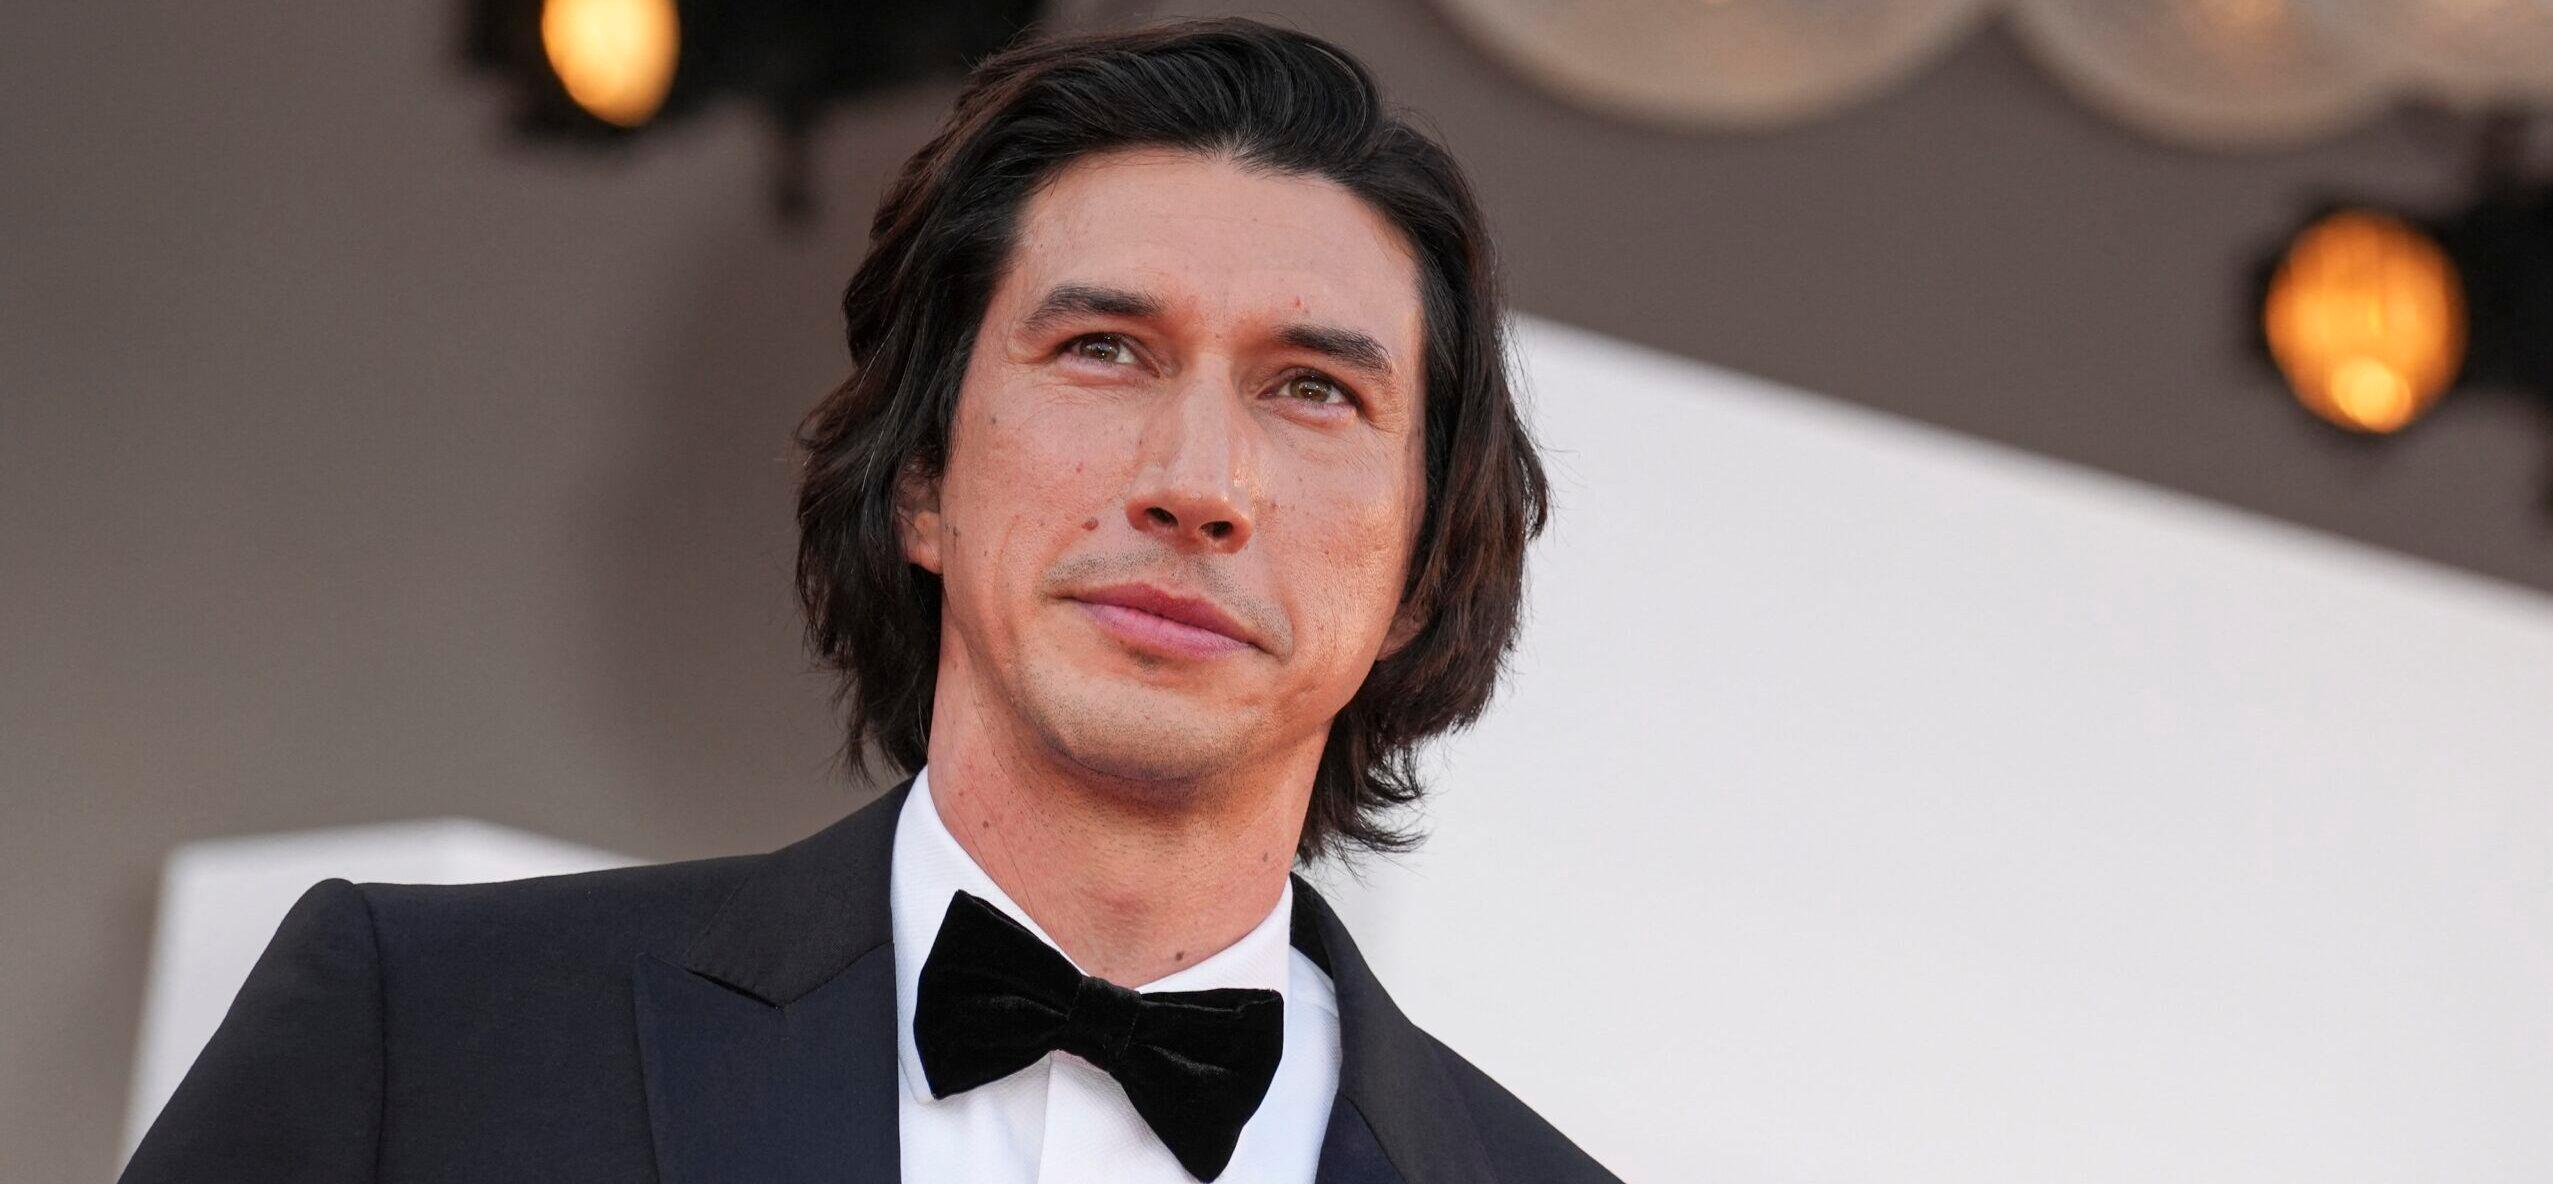 Adam Driver's second shirtless Burberry campaign goes viral. Again